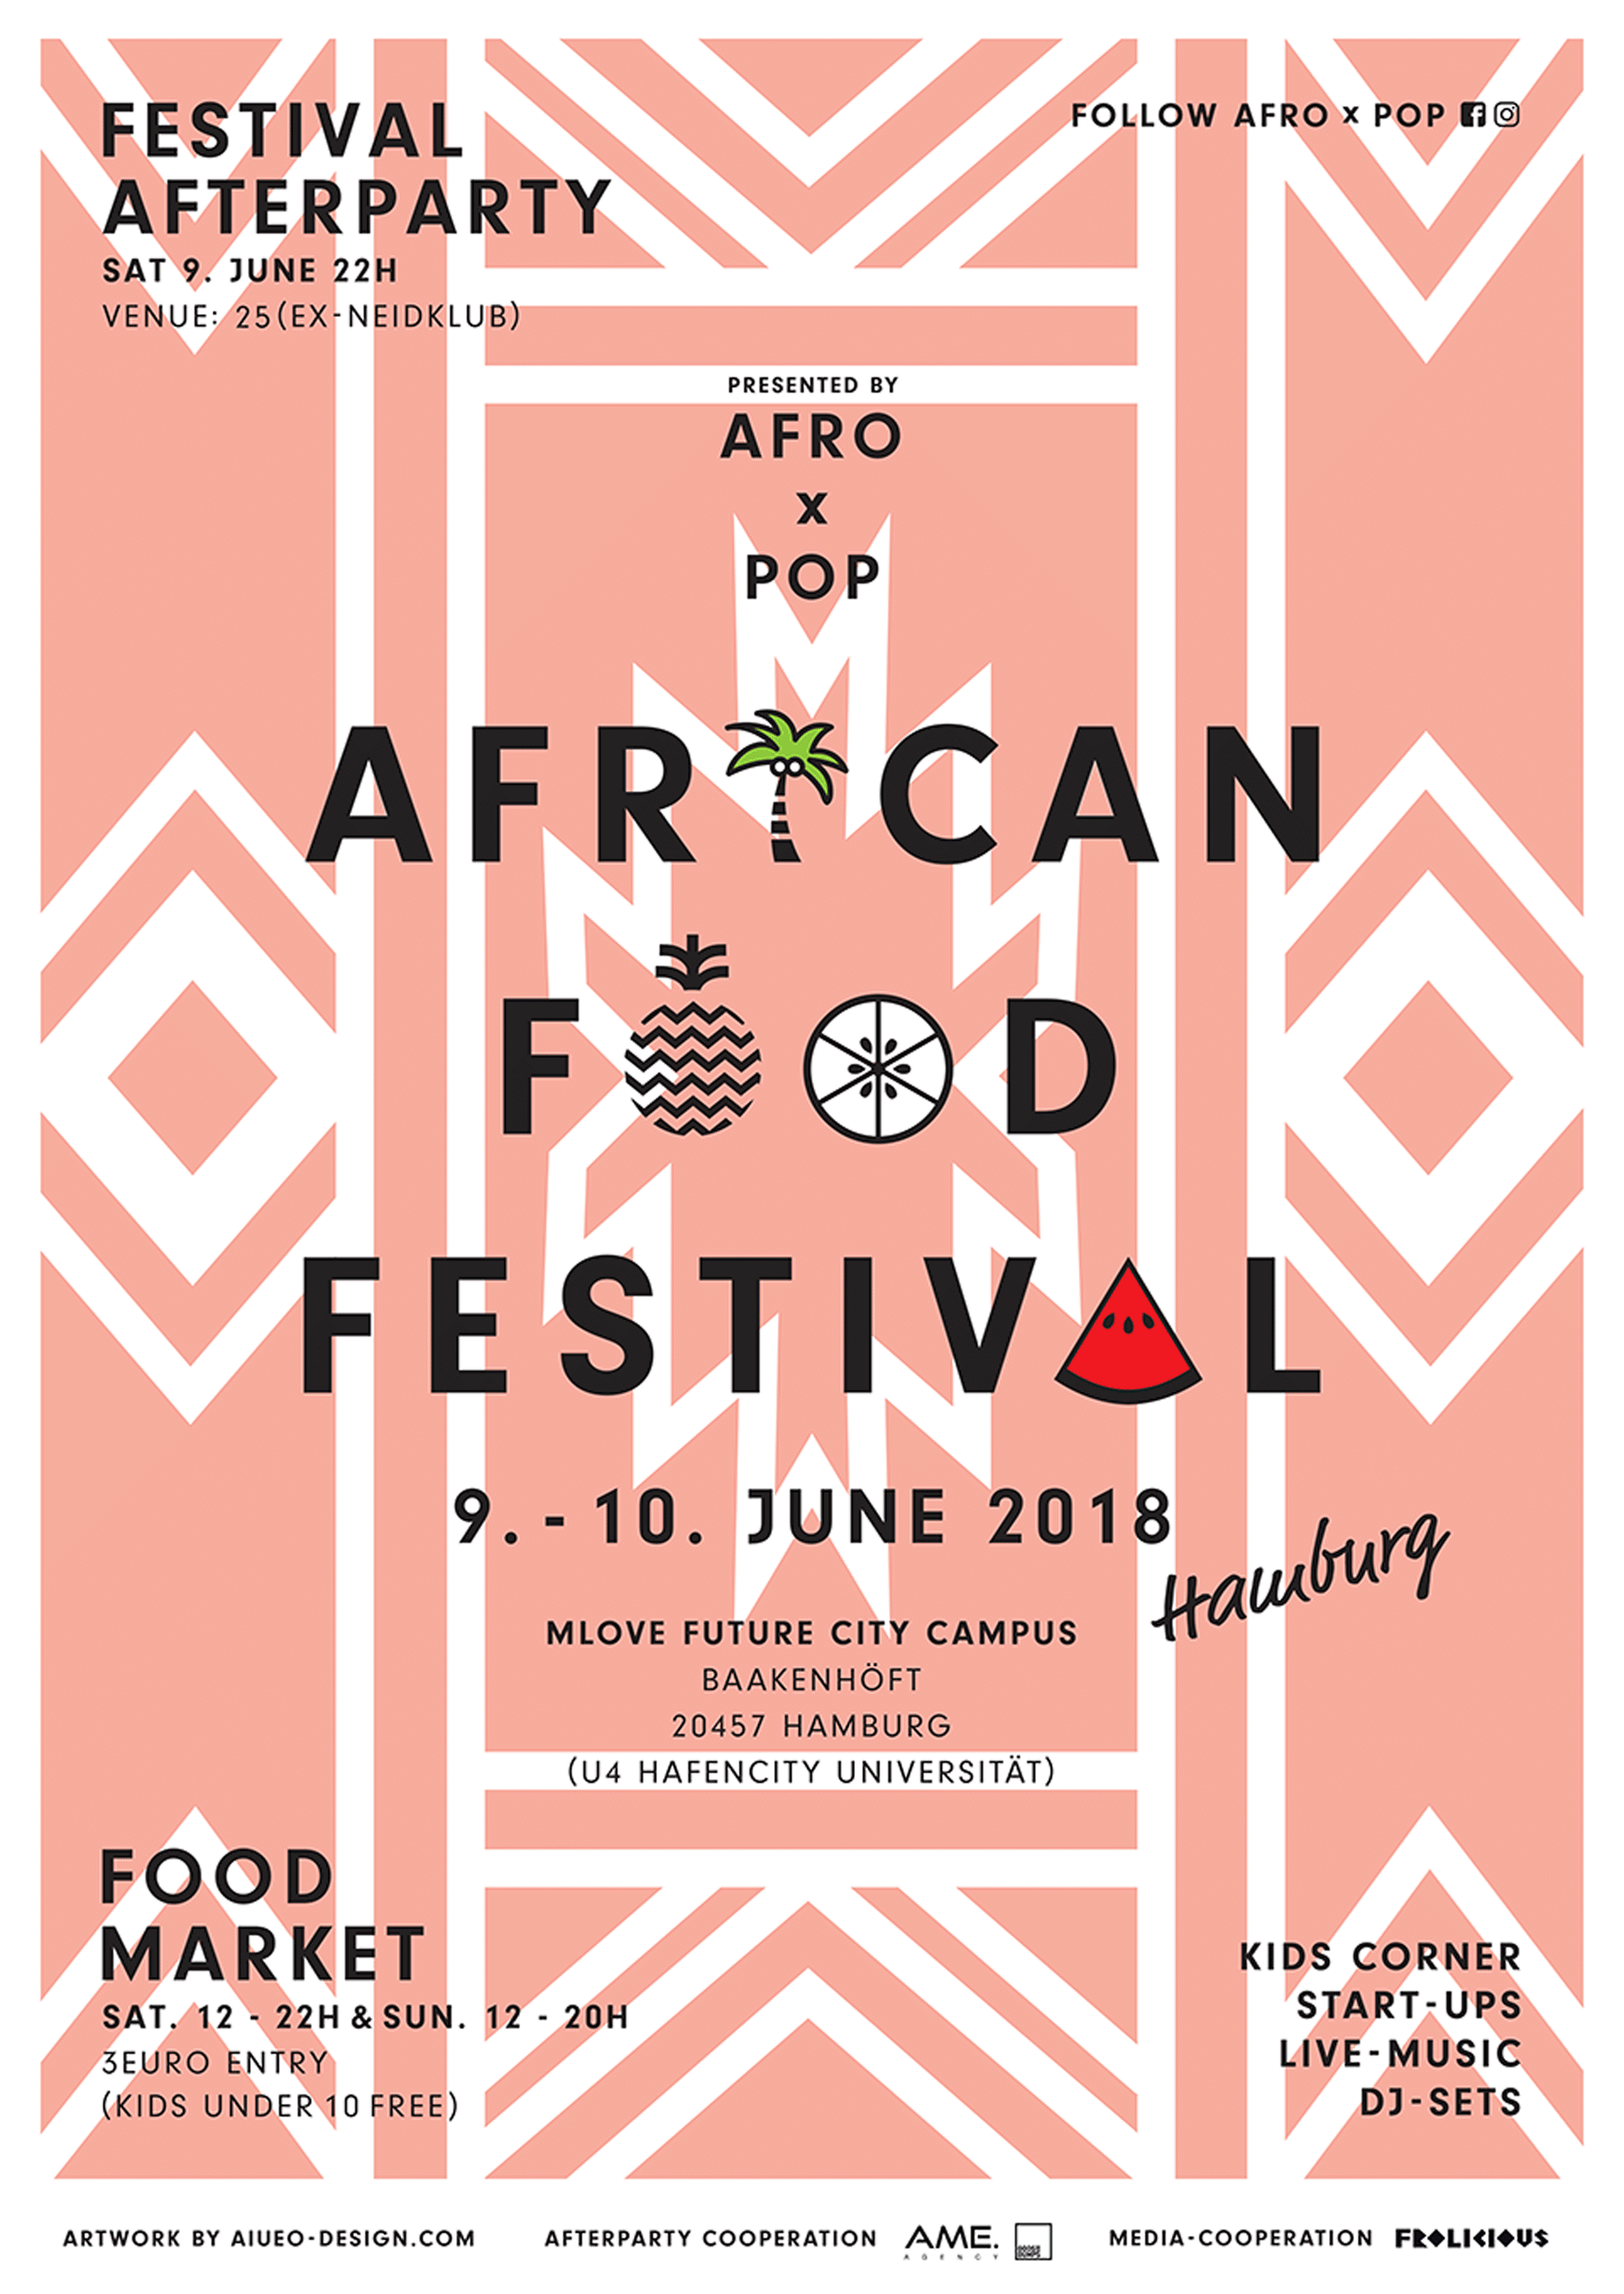 African Food Festival // AFRO X POP ()